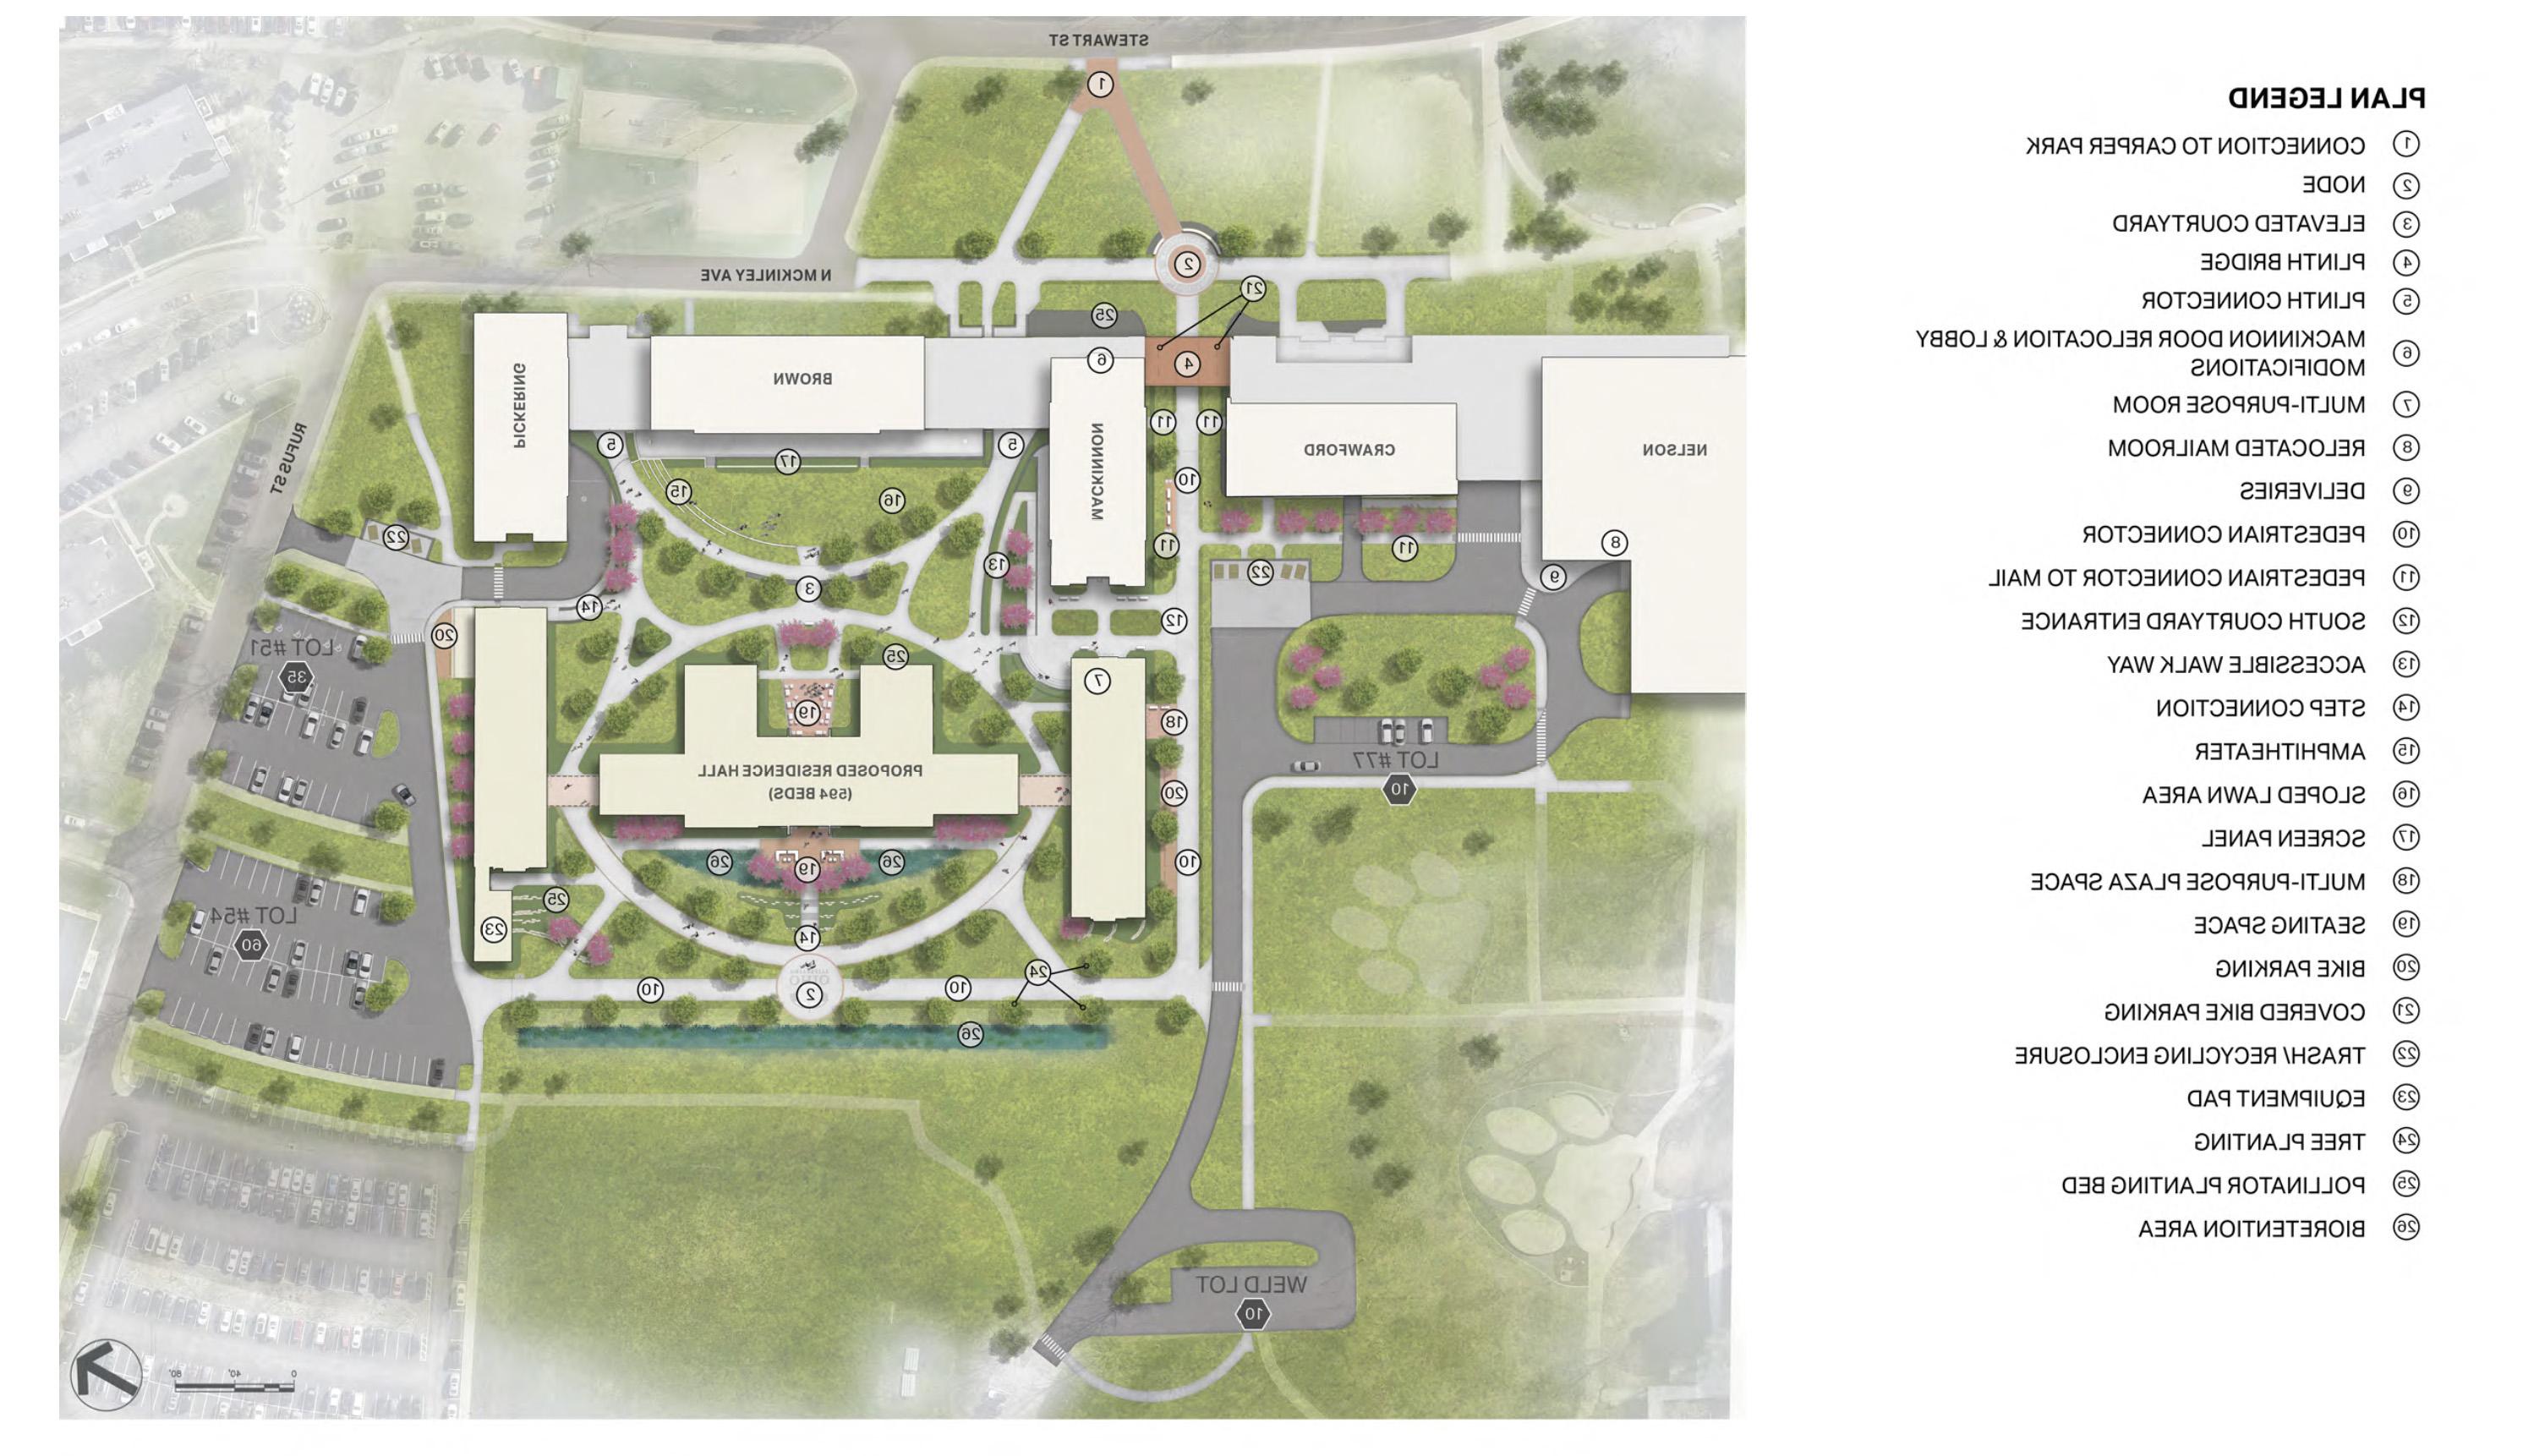 Rendering of the Housing master plan site plan including a map of the proposed plan